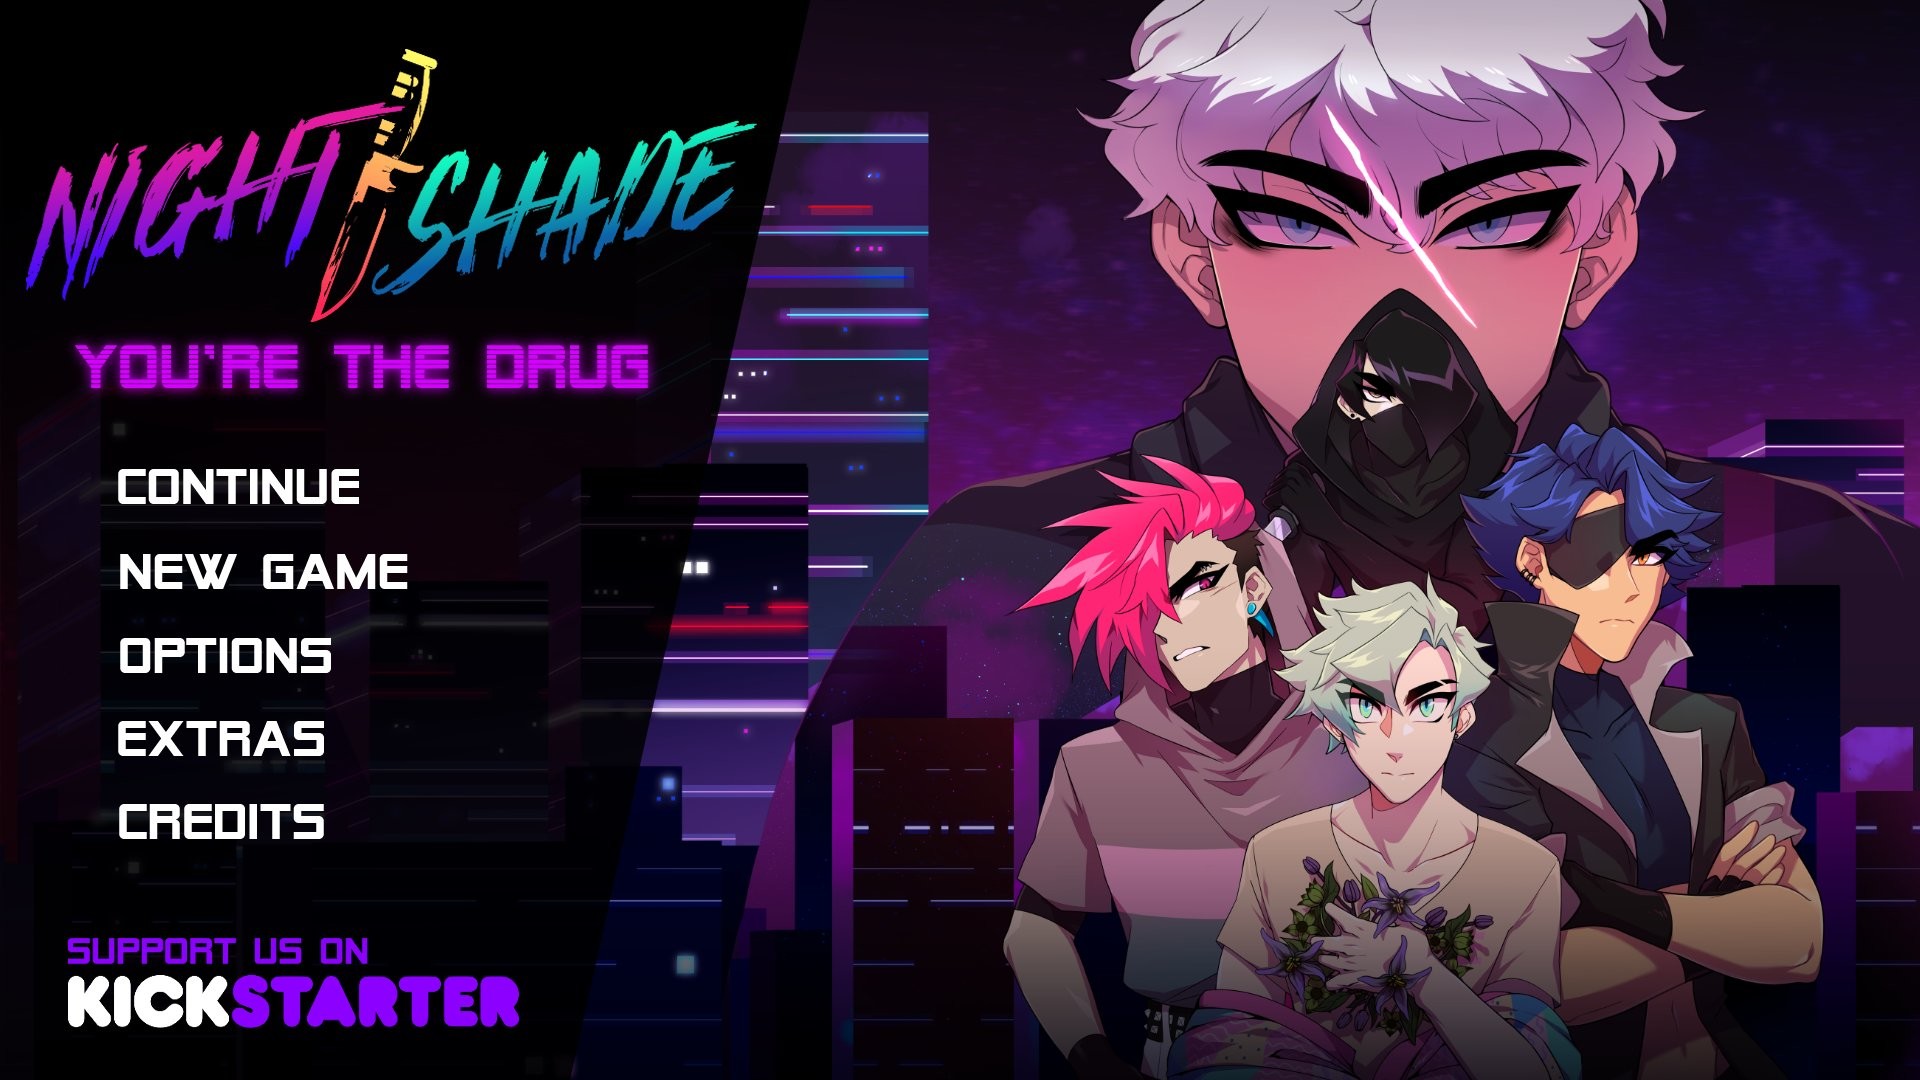 NIGHT/SHADE: You're The Drug Demo Featured Screenshot #1